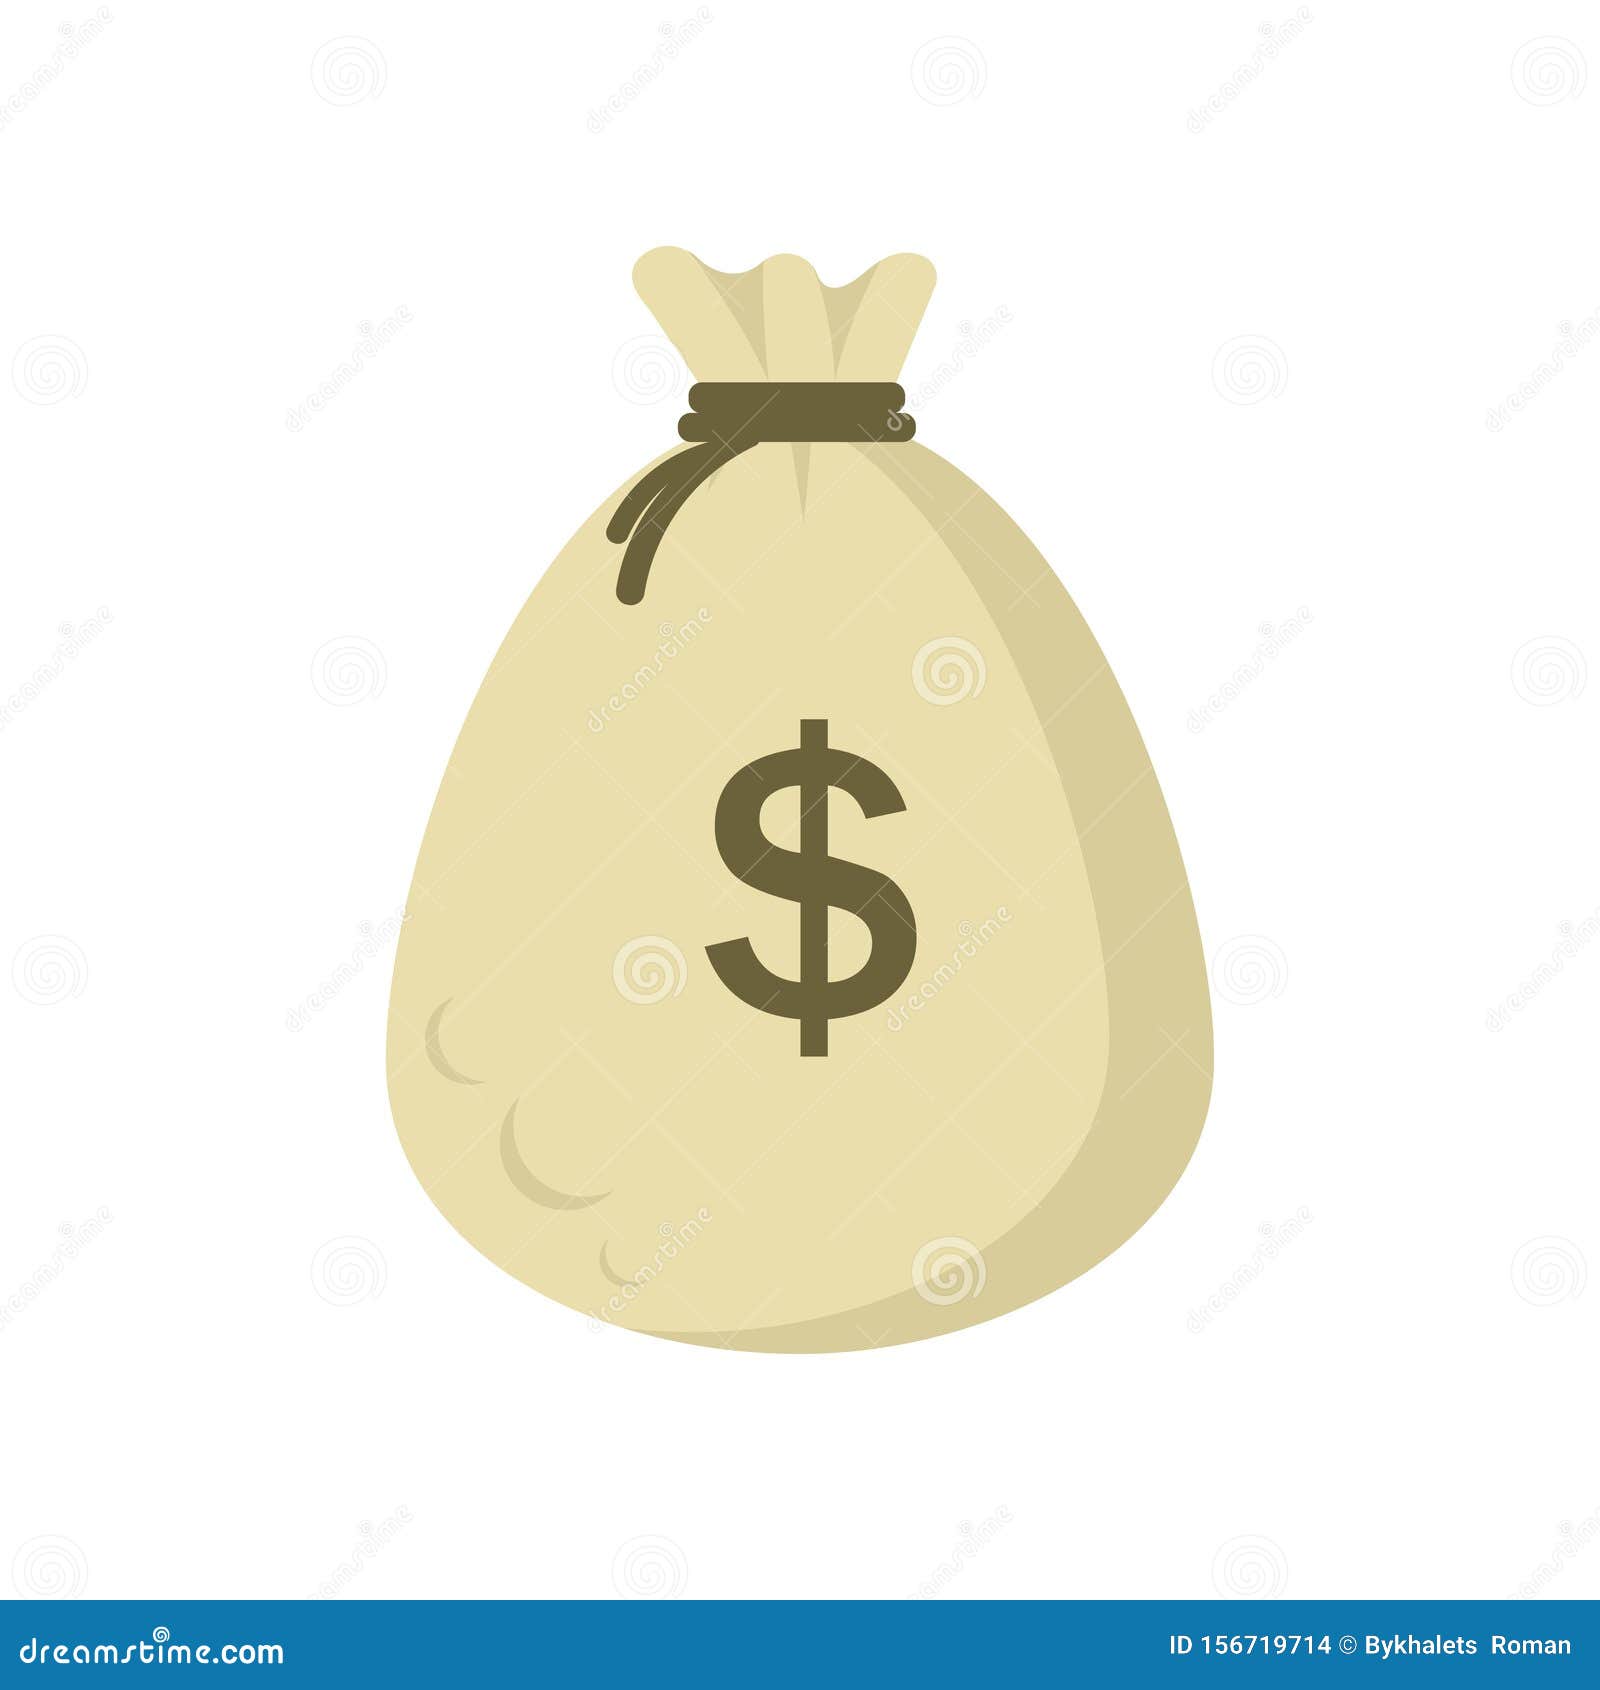 Vector Icon of Money Bag with Shadow Dollar Sign EPS 10 Full of Money Bag  Dollar Grey Color Succes Bussines Excellent Profit Stock Illustration -  Illustration of debt, cartoon: 156719714